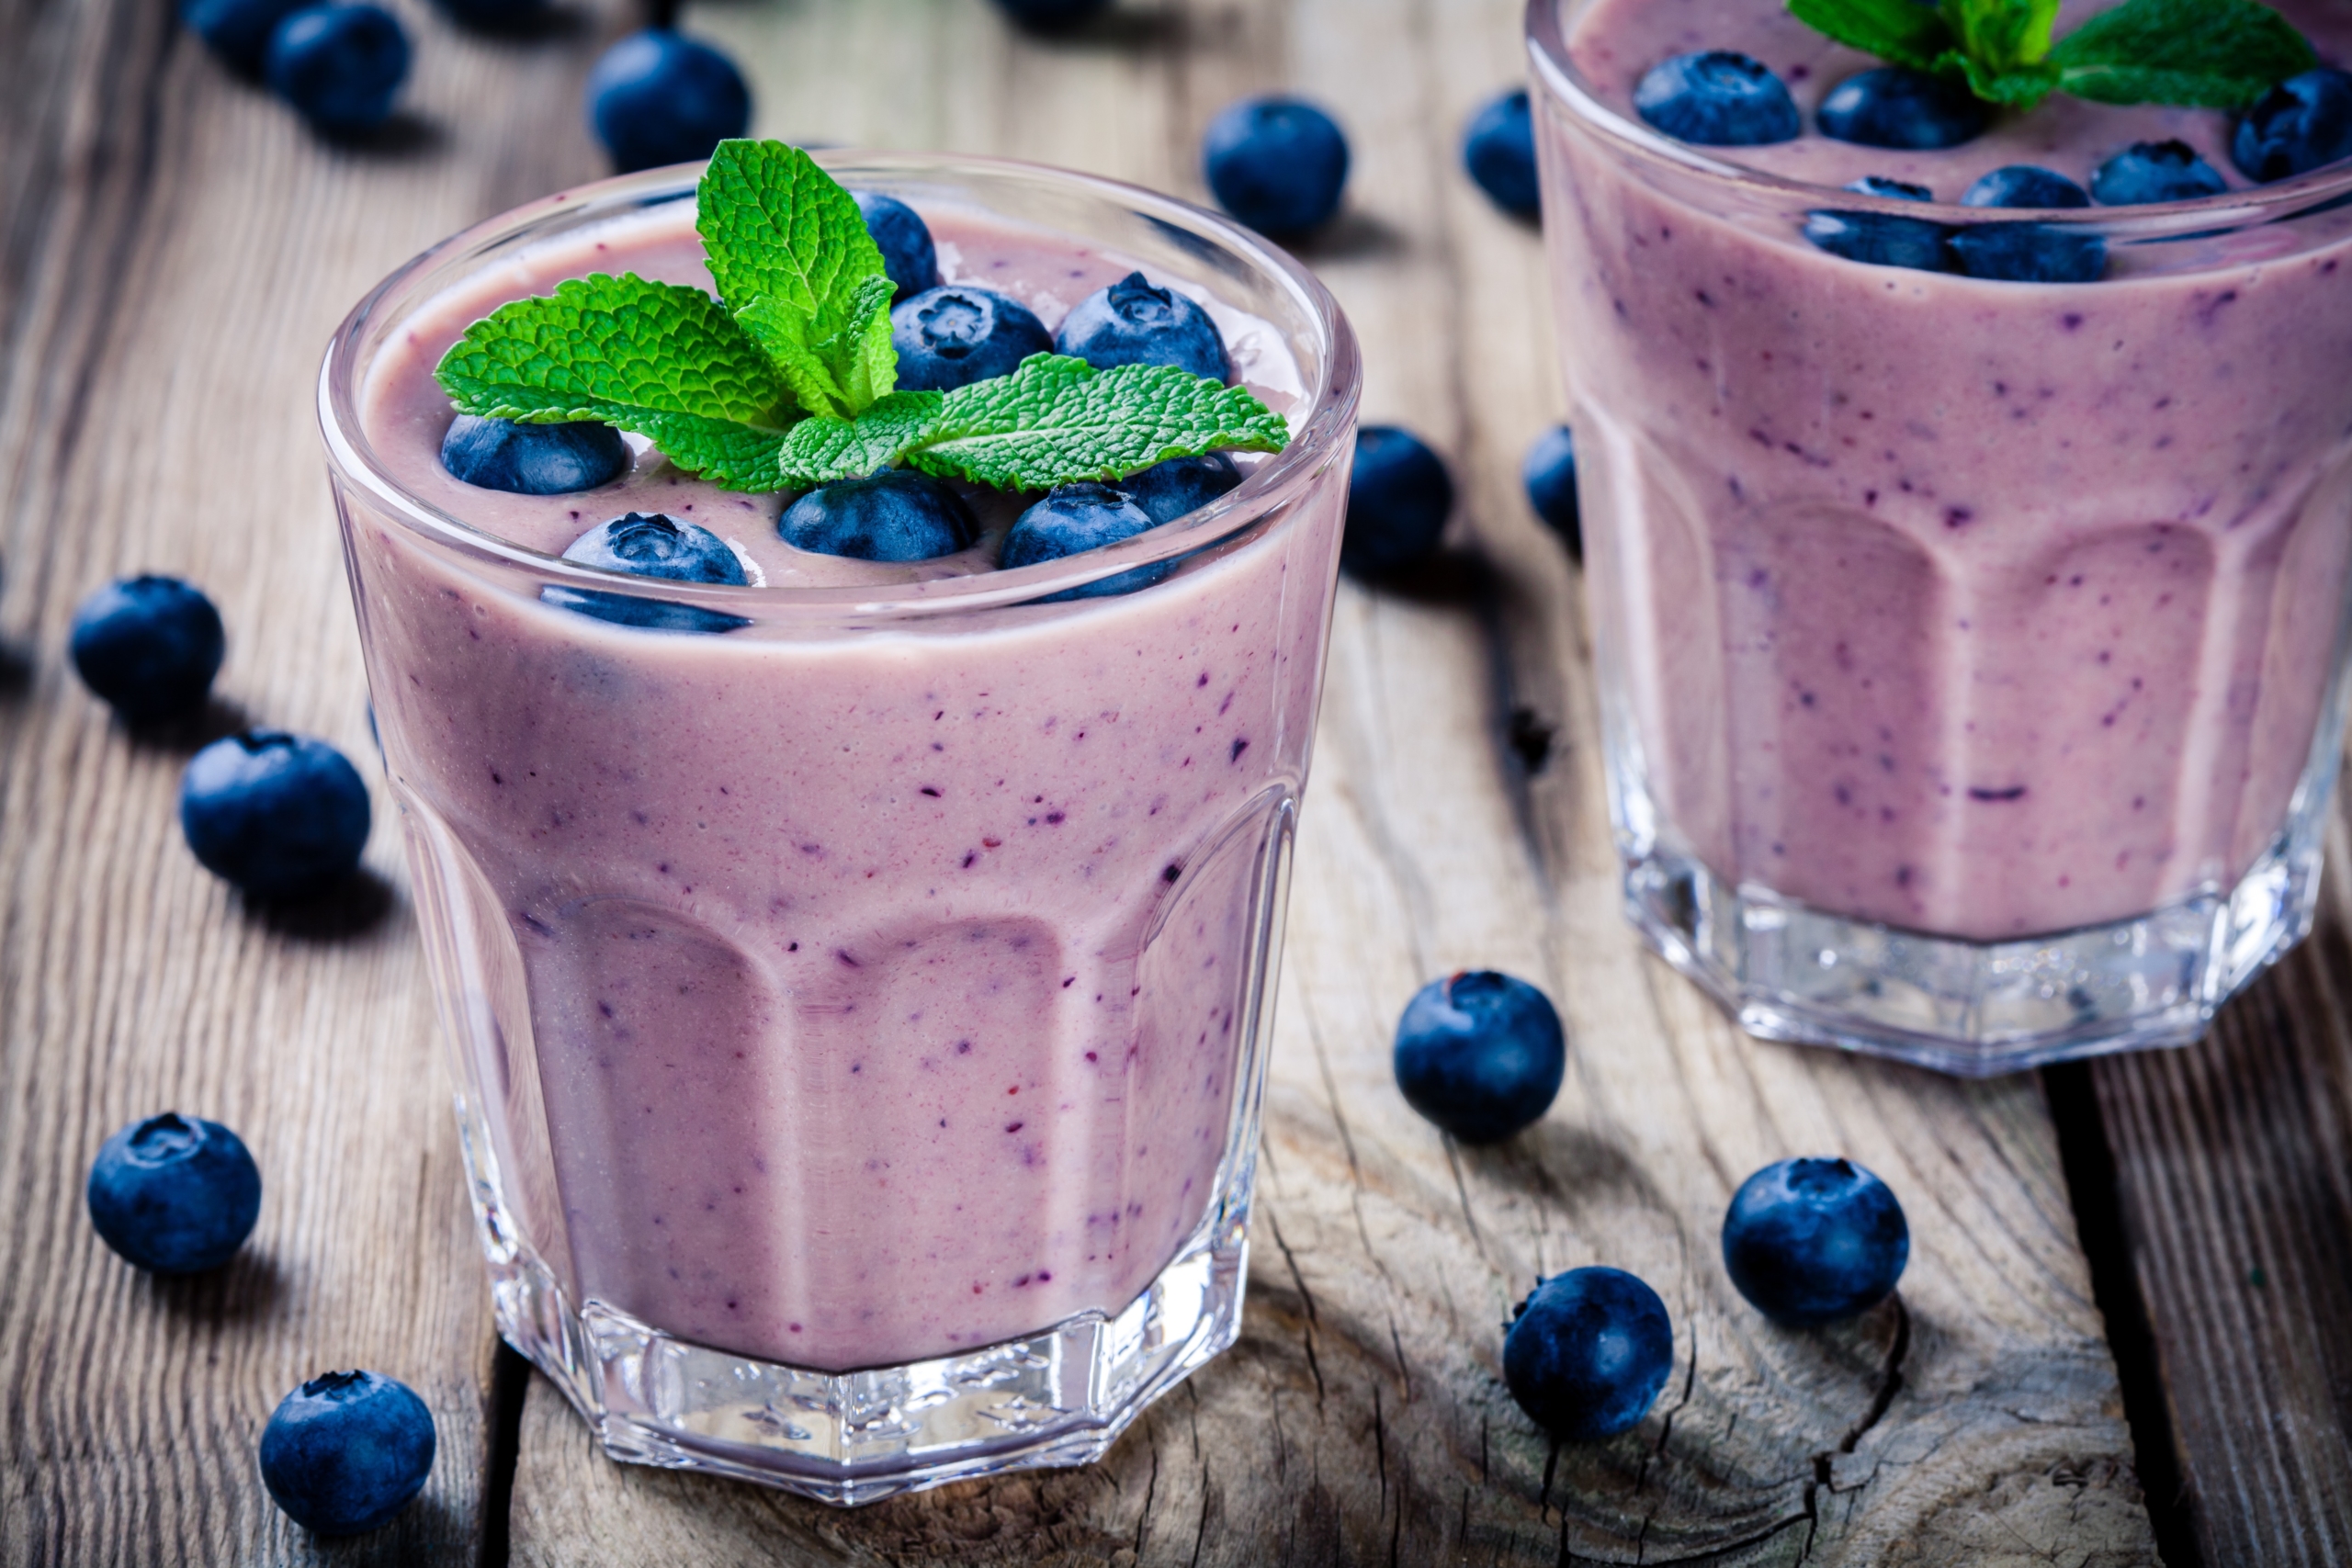 Blueberry smoothie in a glass on a rustic table